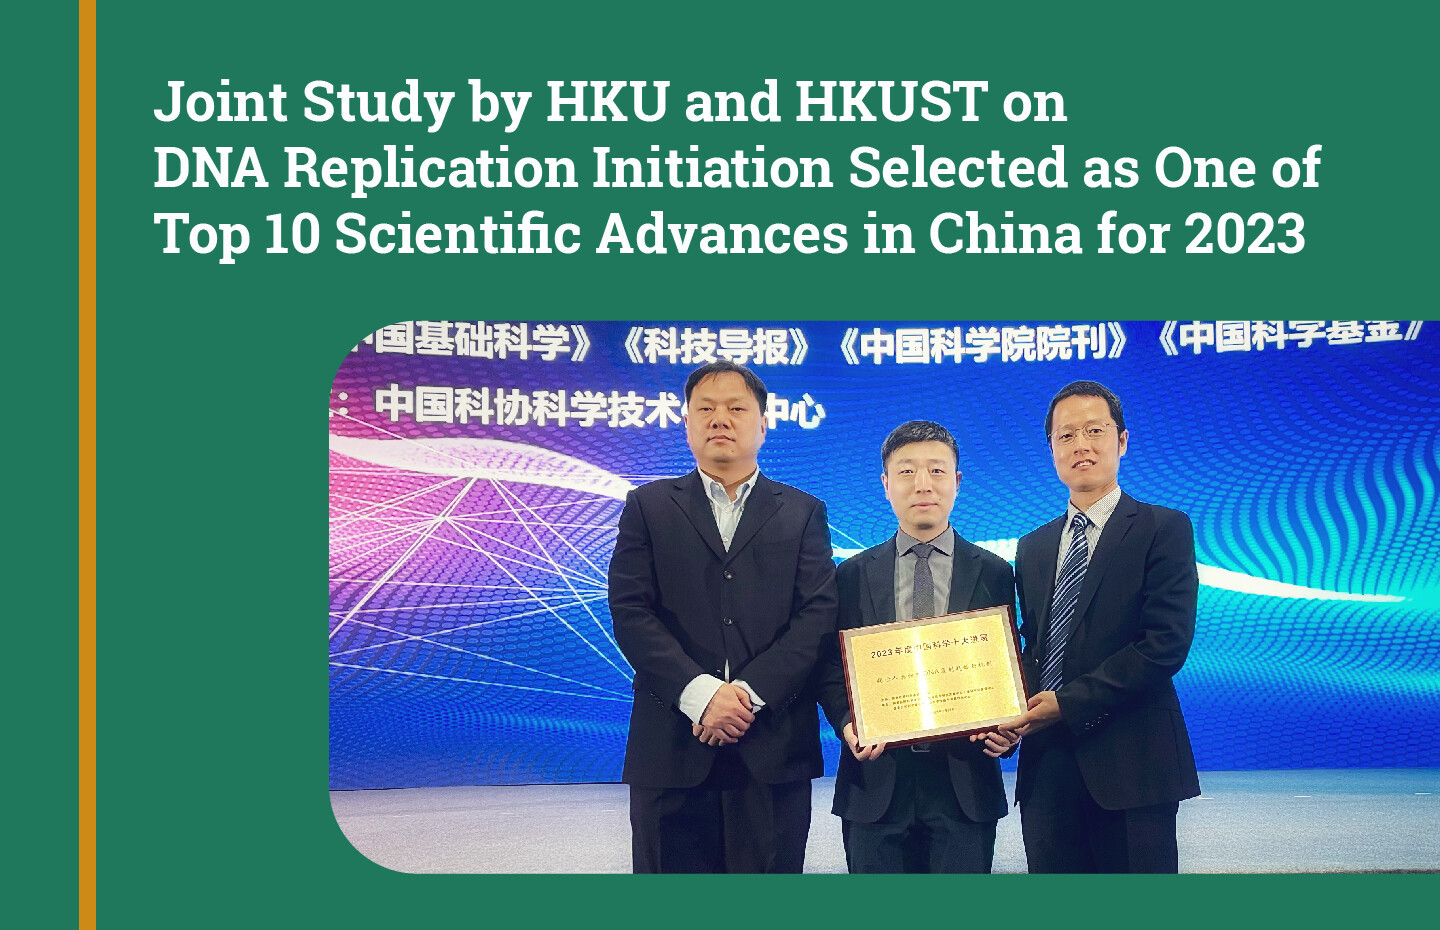 Joint Study by HKU and HKUST on DNA Replication Initiation Selected as One of Top 10 Scientific Advances in China for 2023